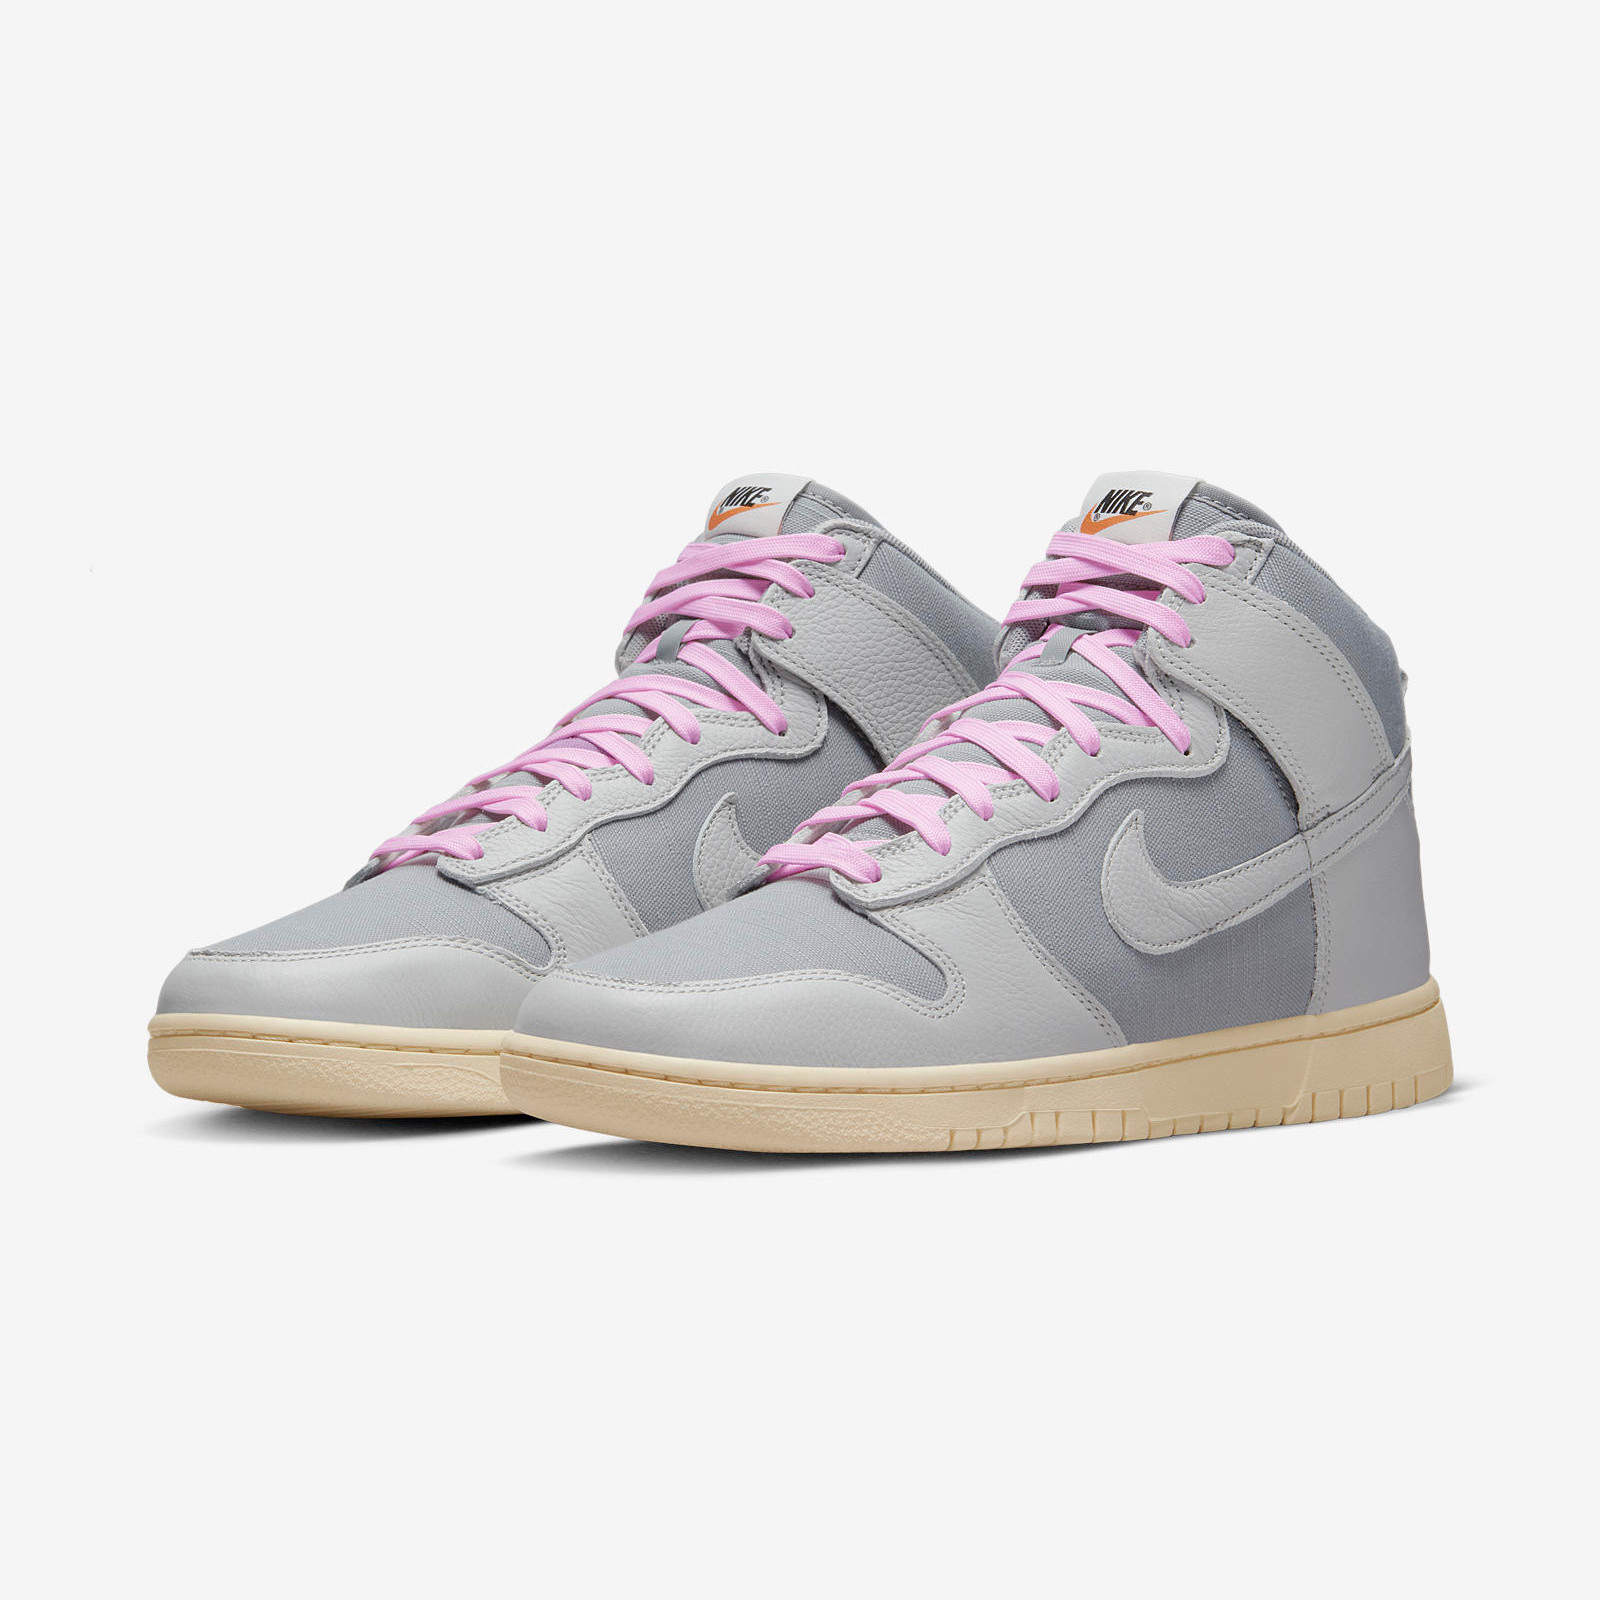 Nike Dunk High
« Particle Grey »